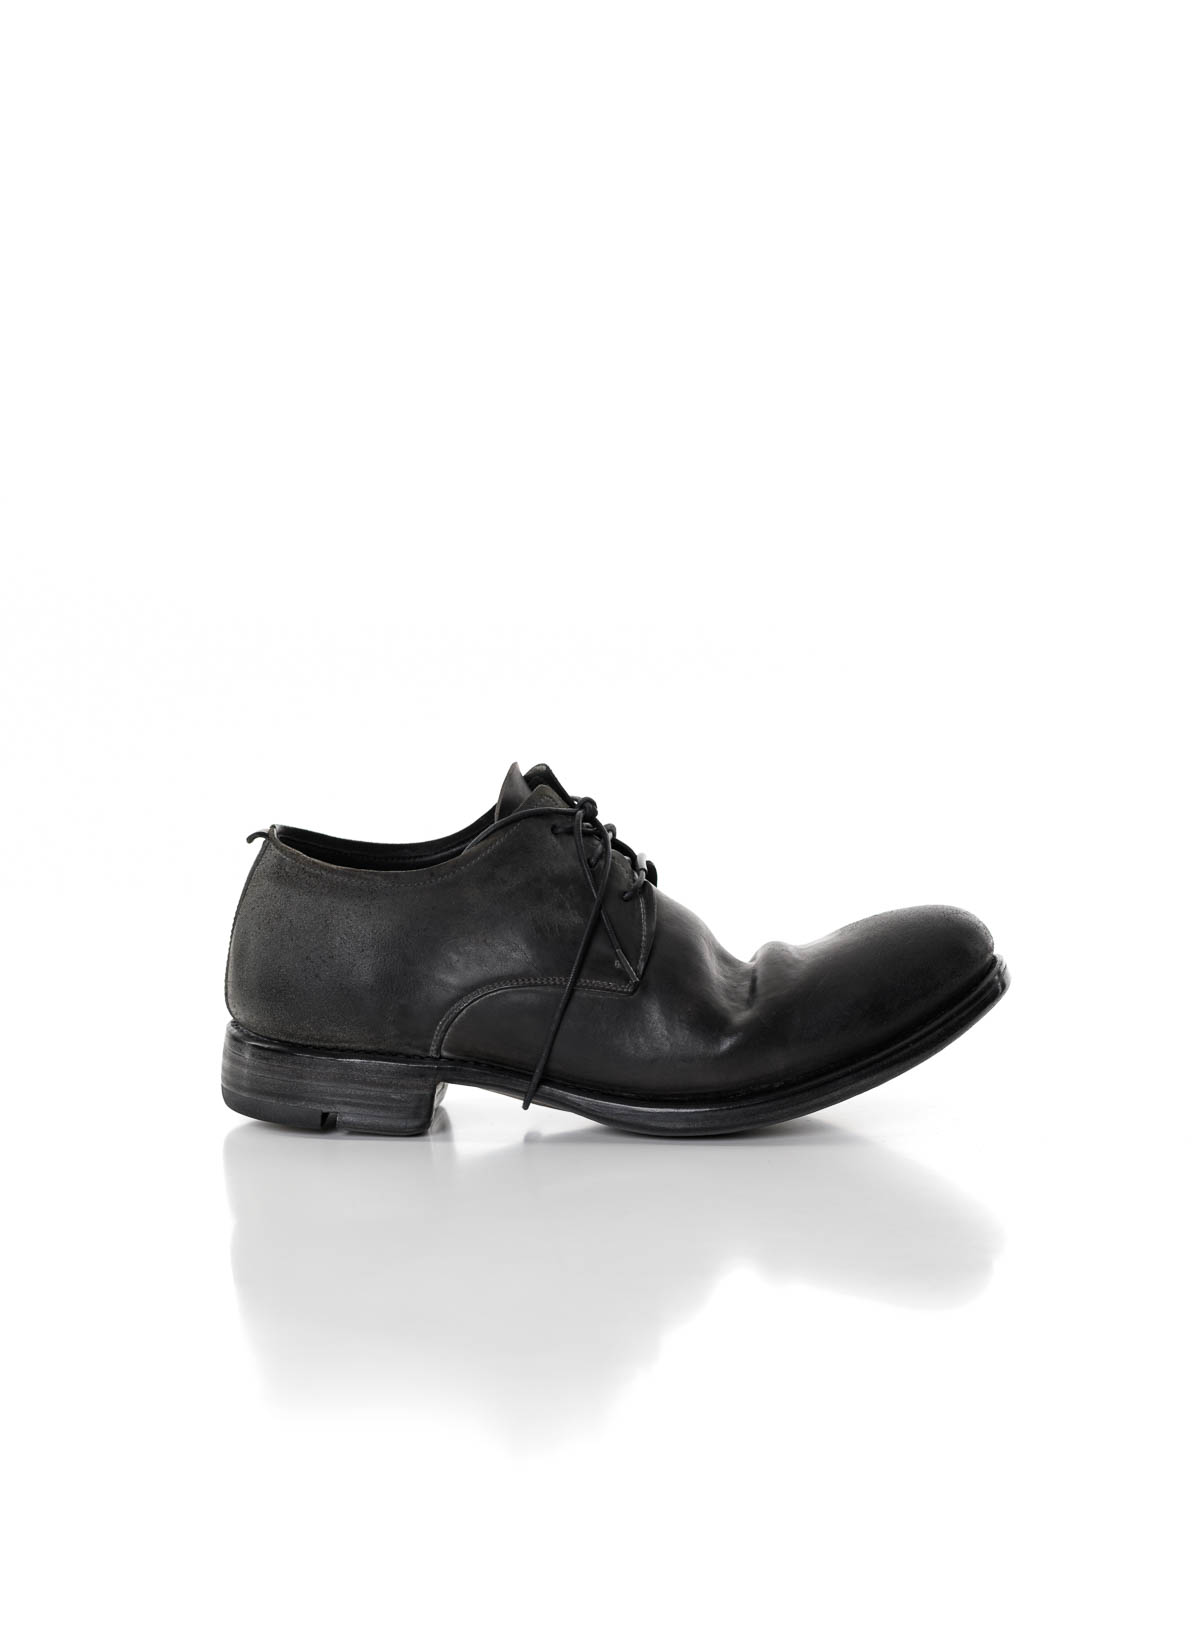 hide-m | LAYER-0 Men Classic Derby Shoe 1.5 H7 GY, cordovan leather